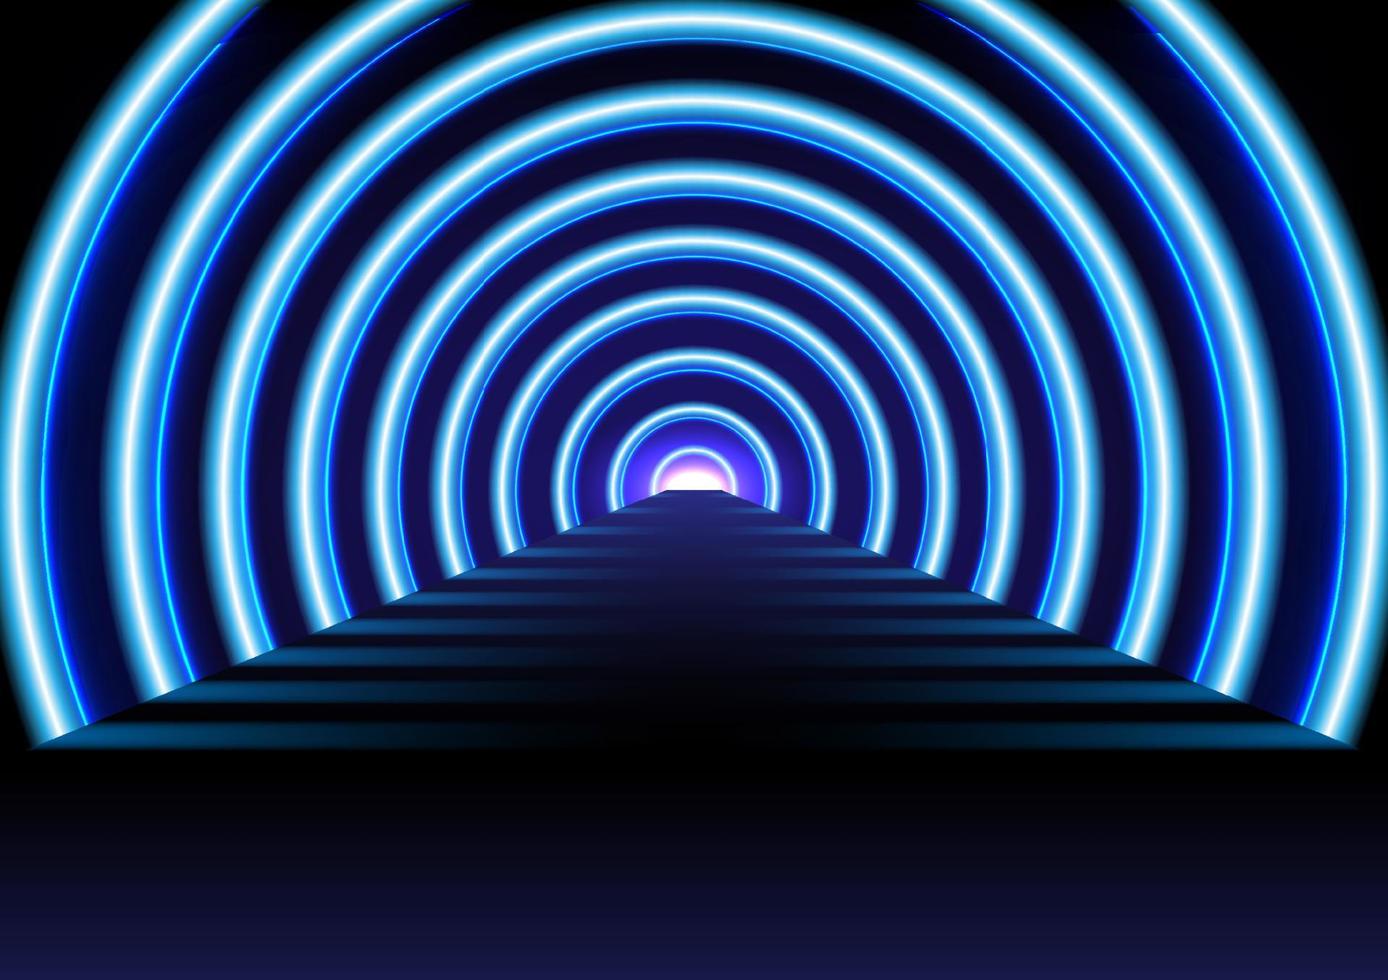 Abstract Technology Background Blue Glow Tunnel Perspectives and roads with glowing lines at the ends of lights illuminate the gradient background. vector